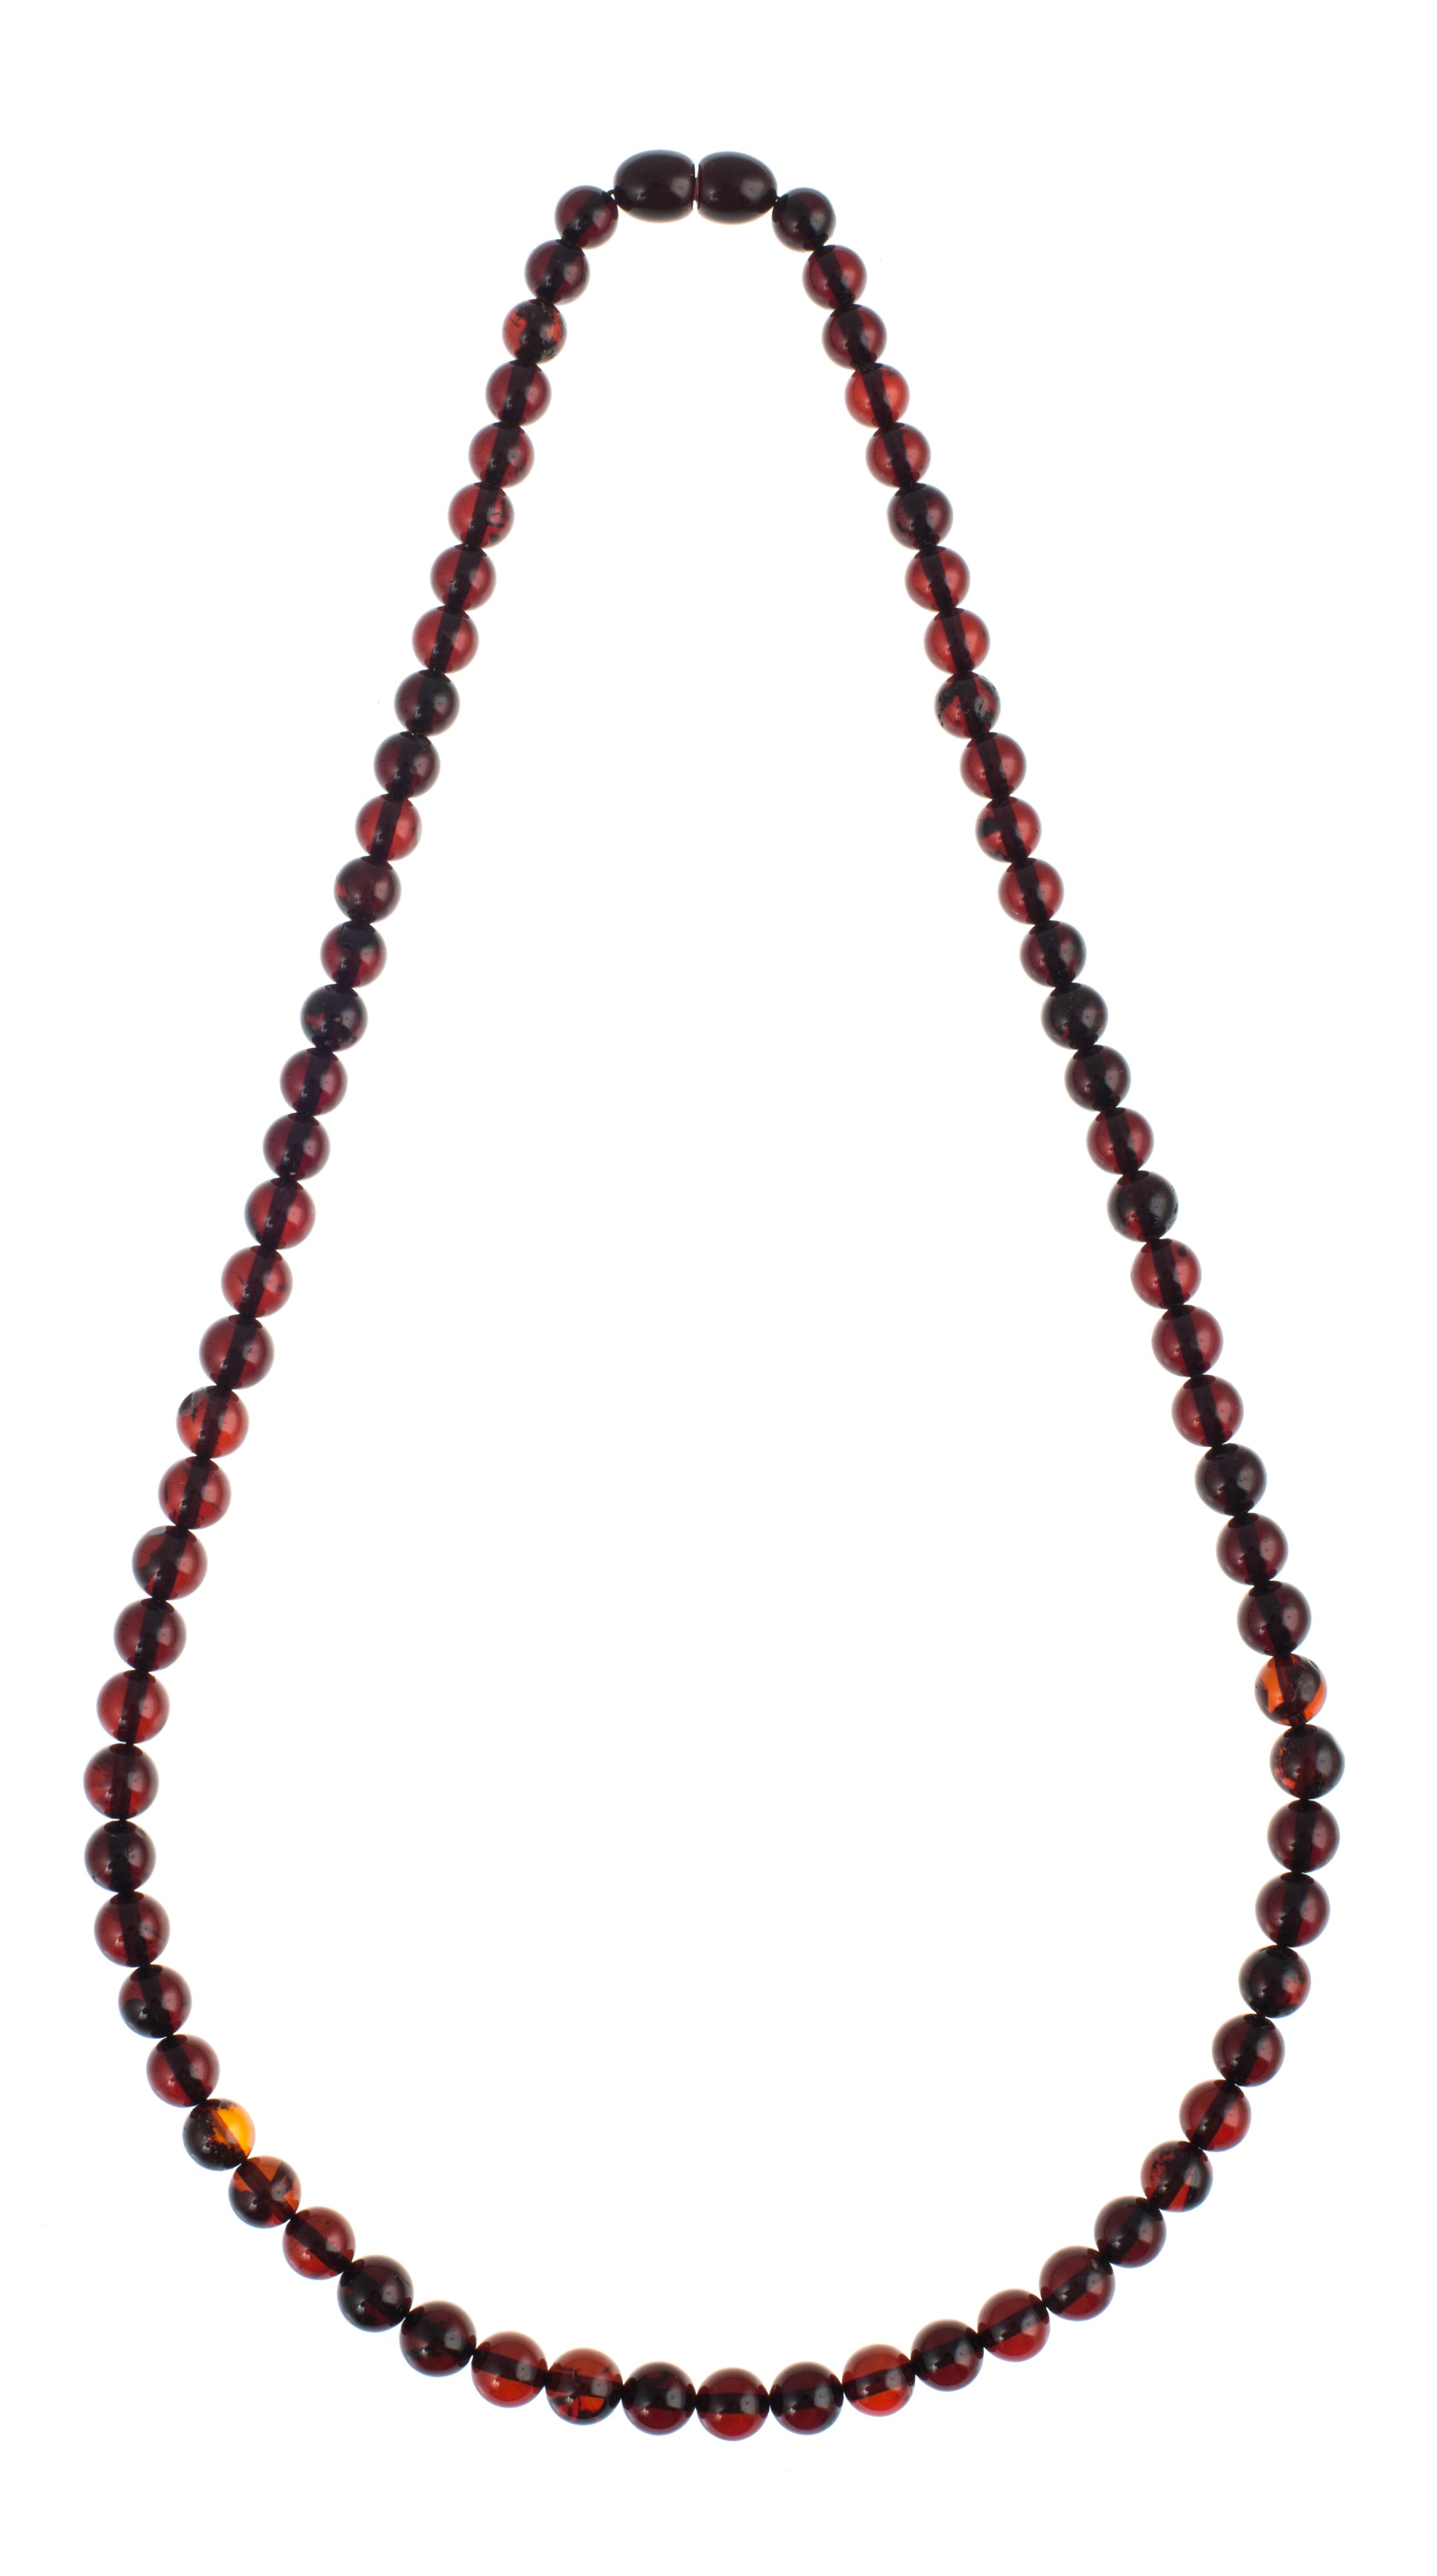 Amazon.com: AmberJewelry Handmade Baltic Amber Beads Necklace for Adults  Handmade Necklace from Genuine Baltic Amber Beads (17.7 inches (45 cm), ( Cherry) Healing Baltic Amber Necklace : Clothing, Shoes & Jewelry